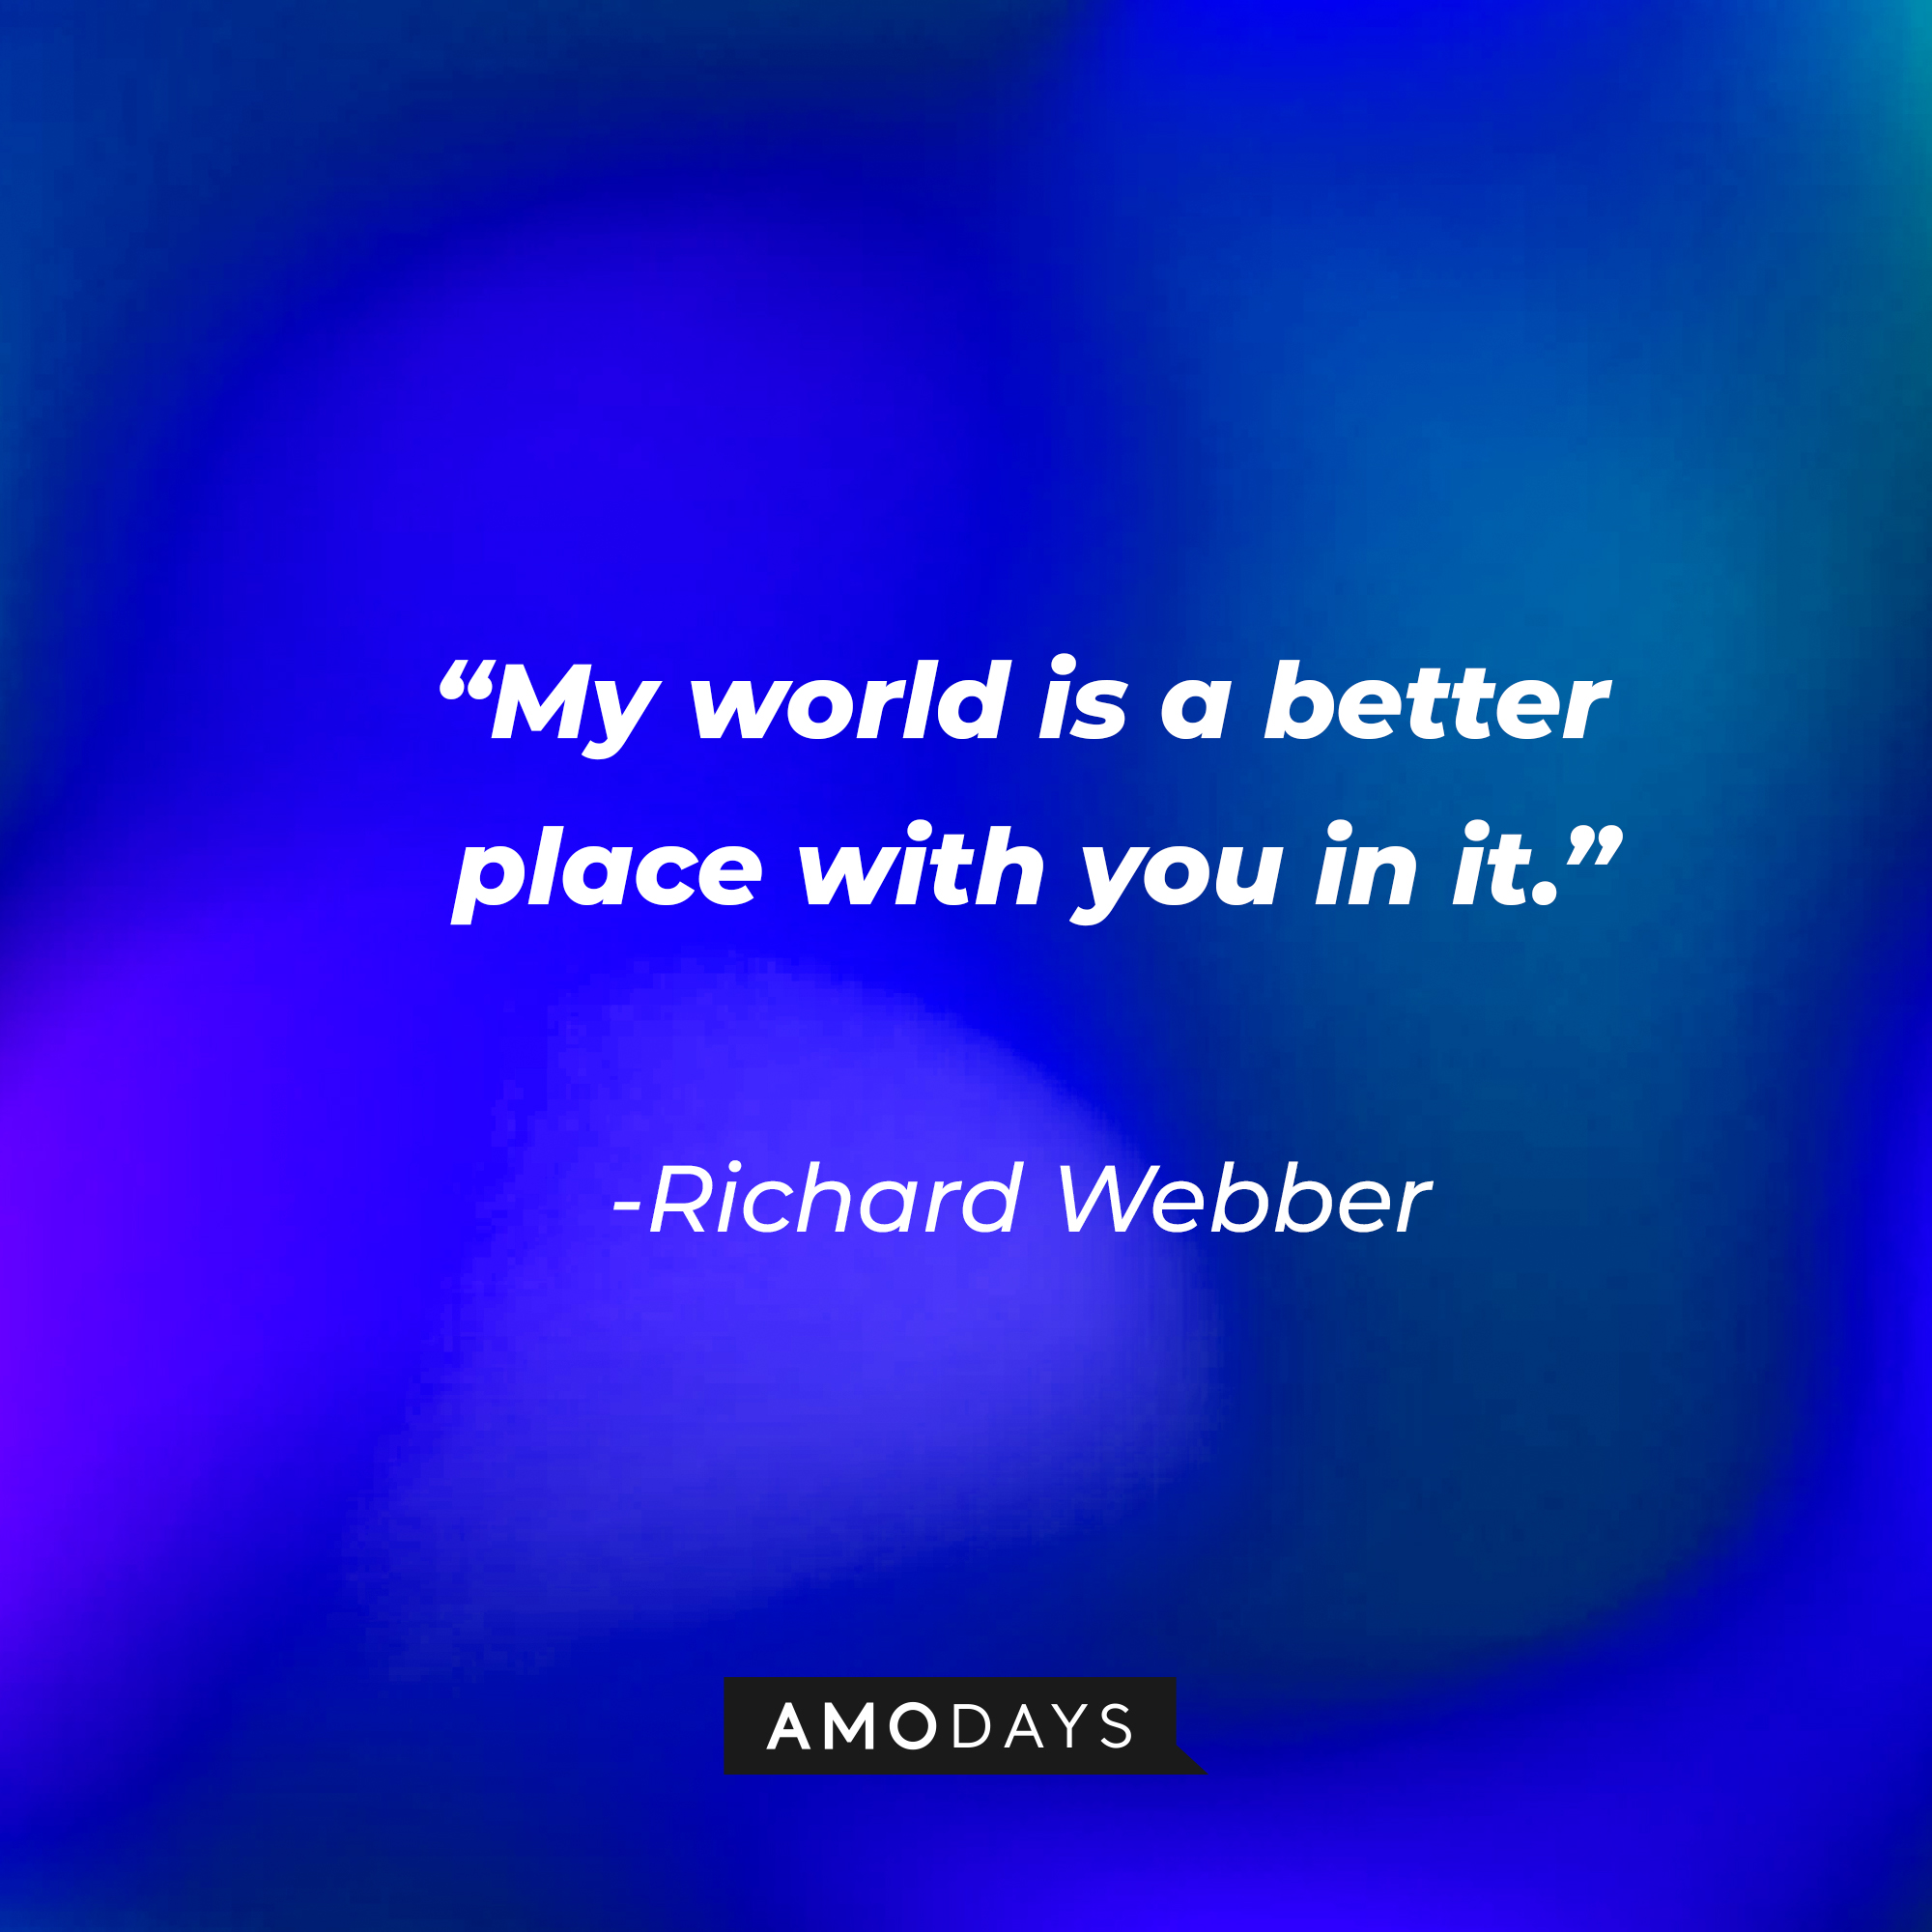 Richard Webber with his quote: "My world is a better place with you in it." | Source: Amodays